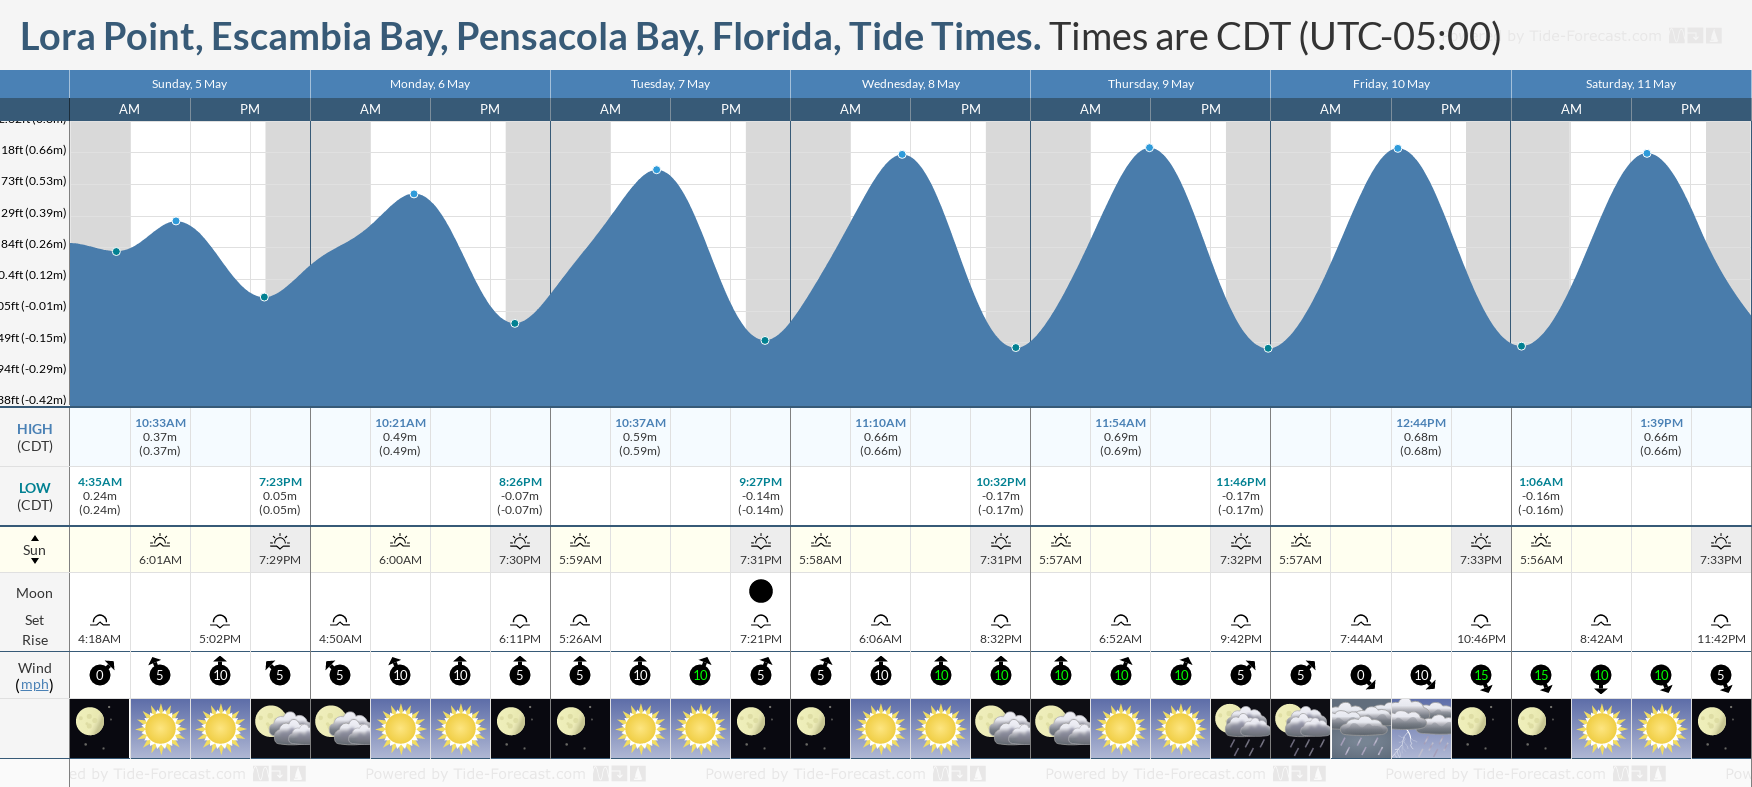 Lora Point, Escambia Bay, Pensacola Bay, Florida Tide Chart including high and low tide tide times for the next 7 days